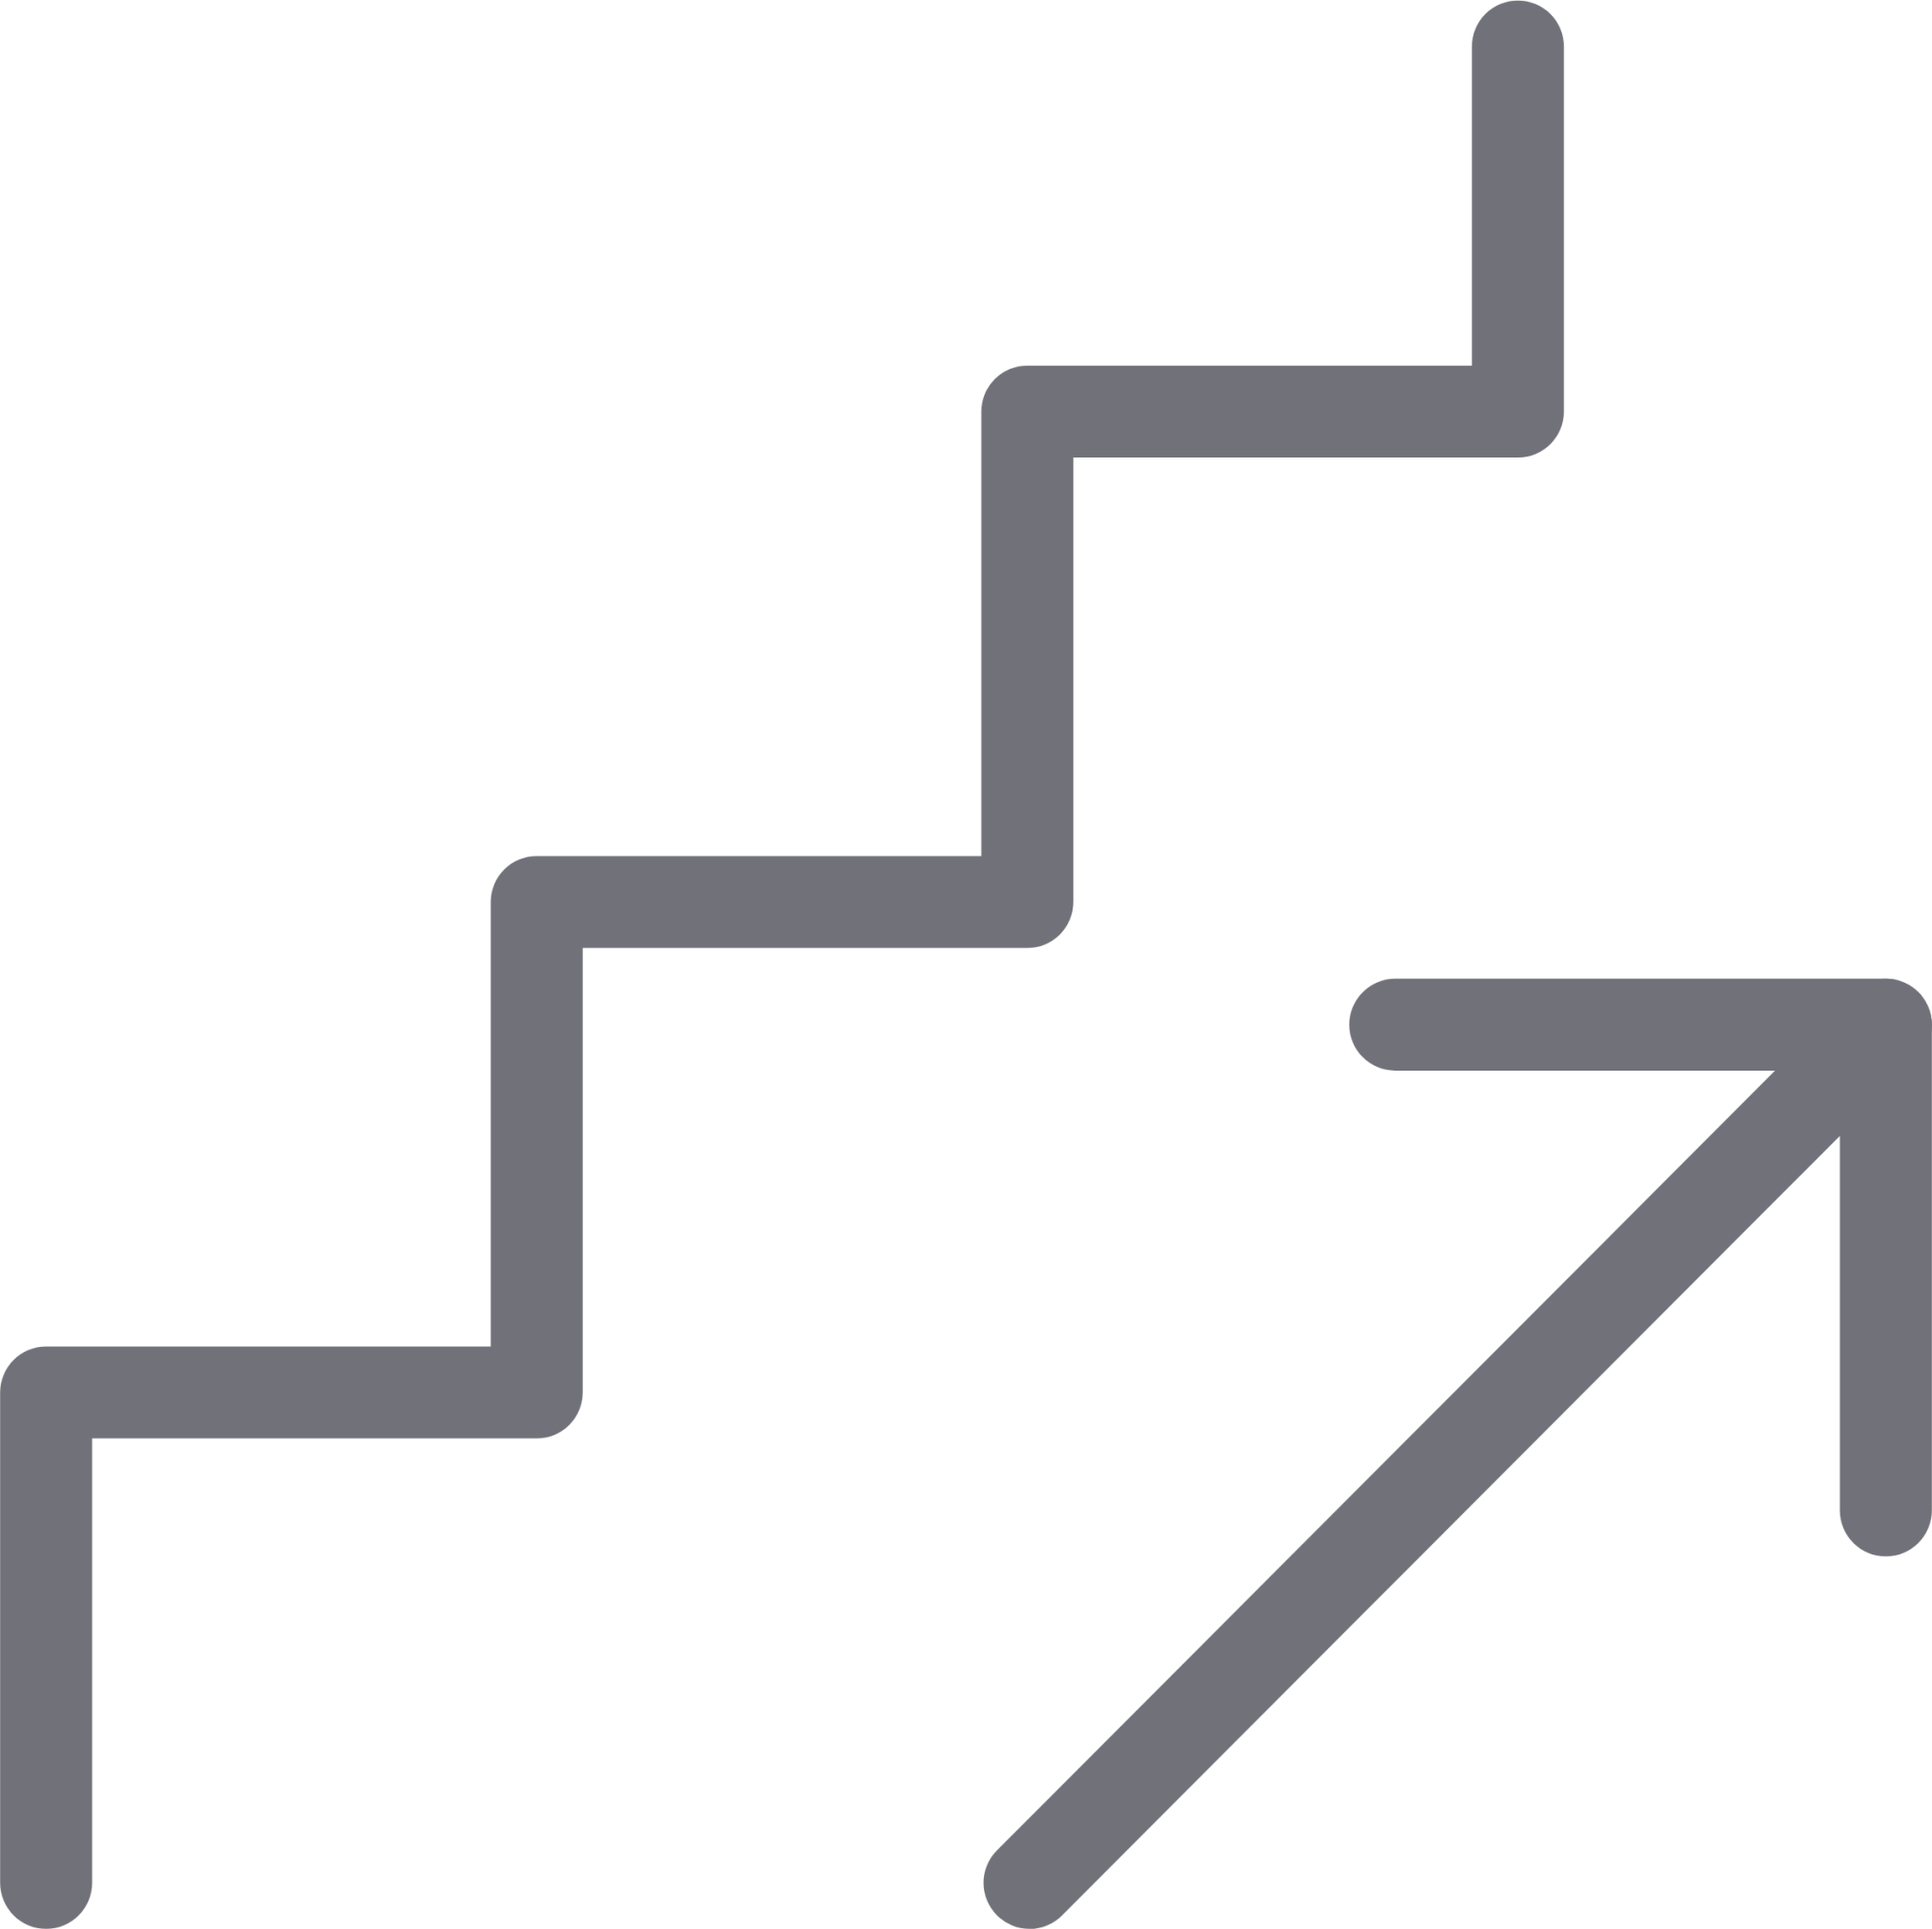 stairs icon